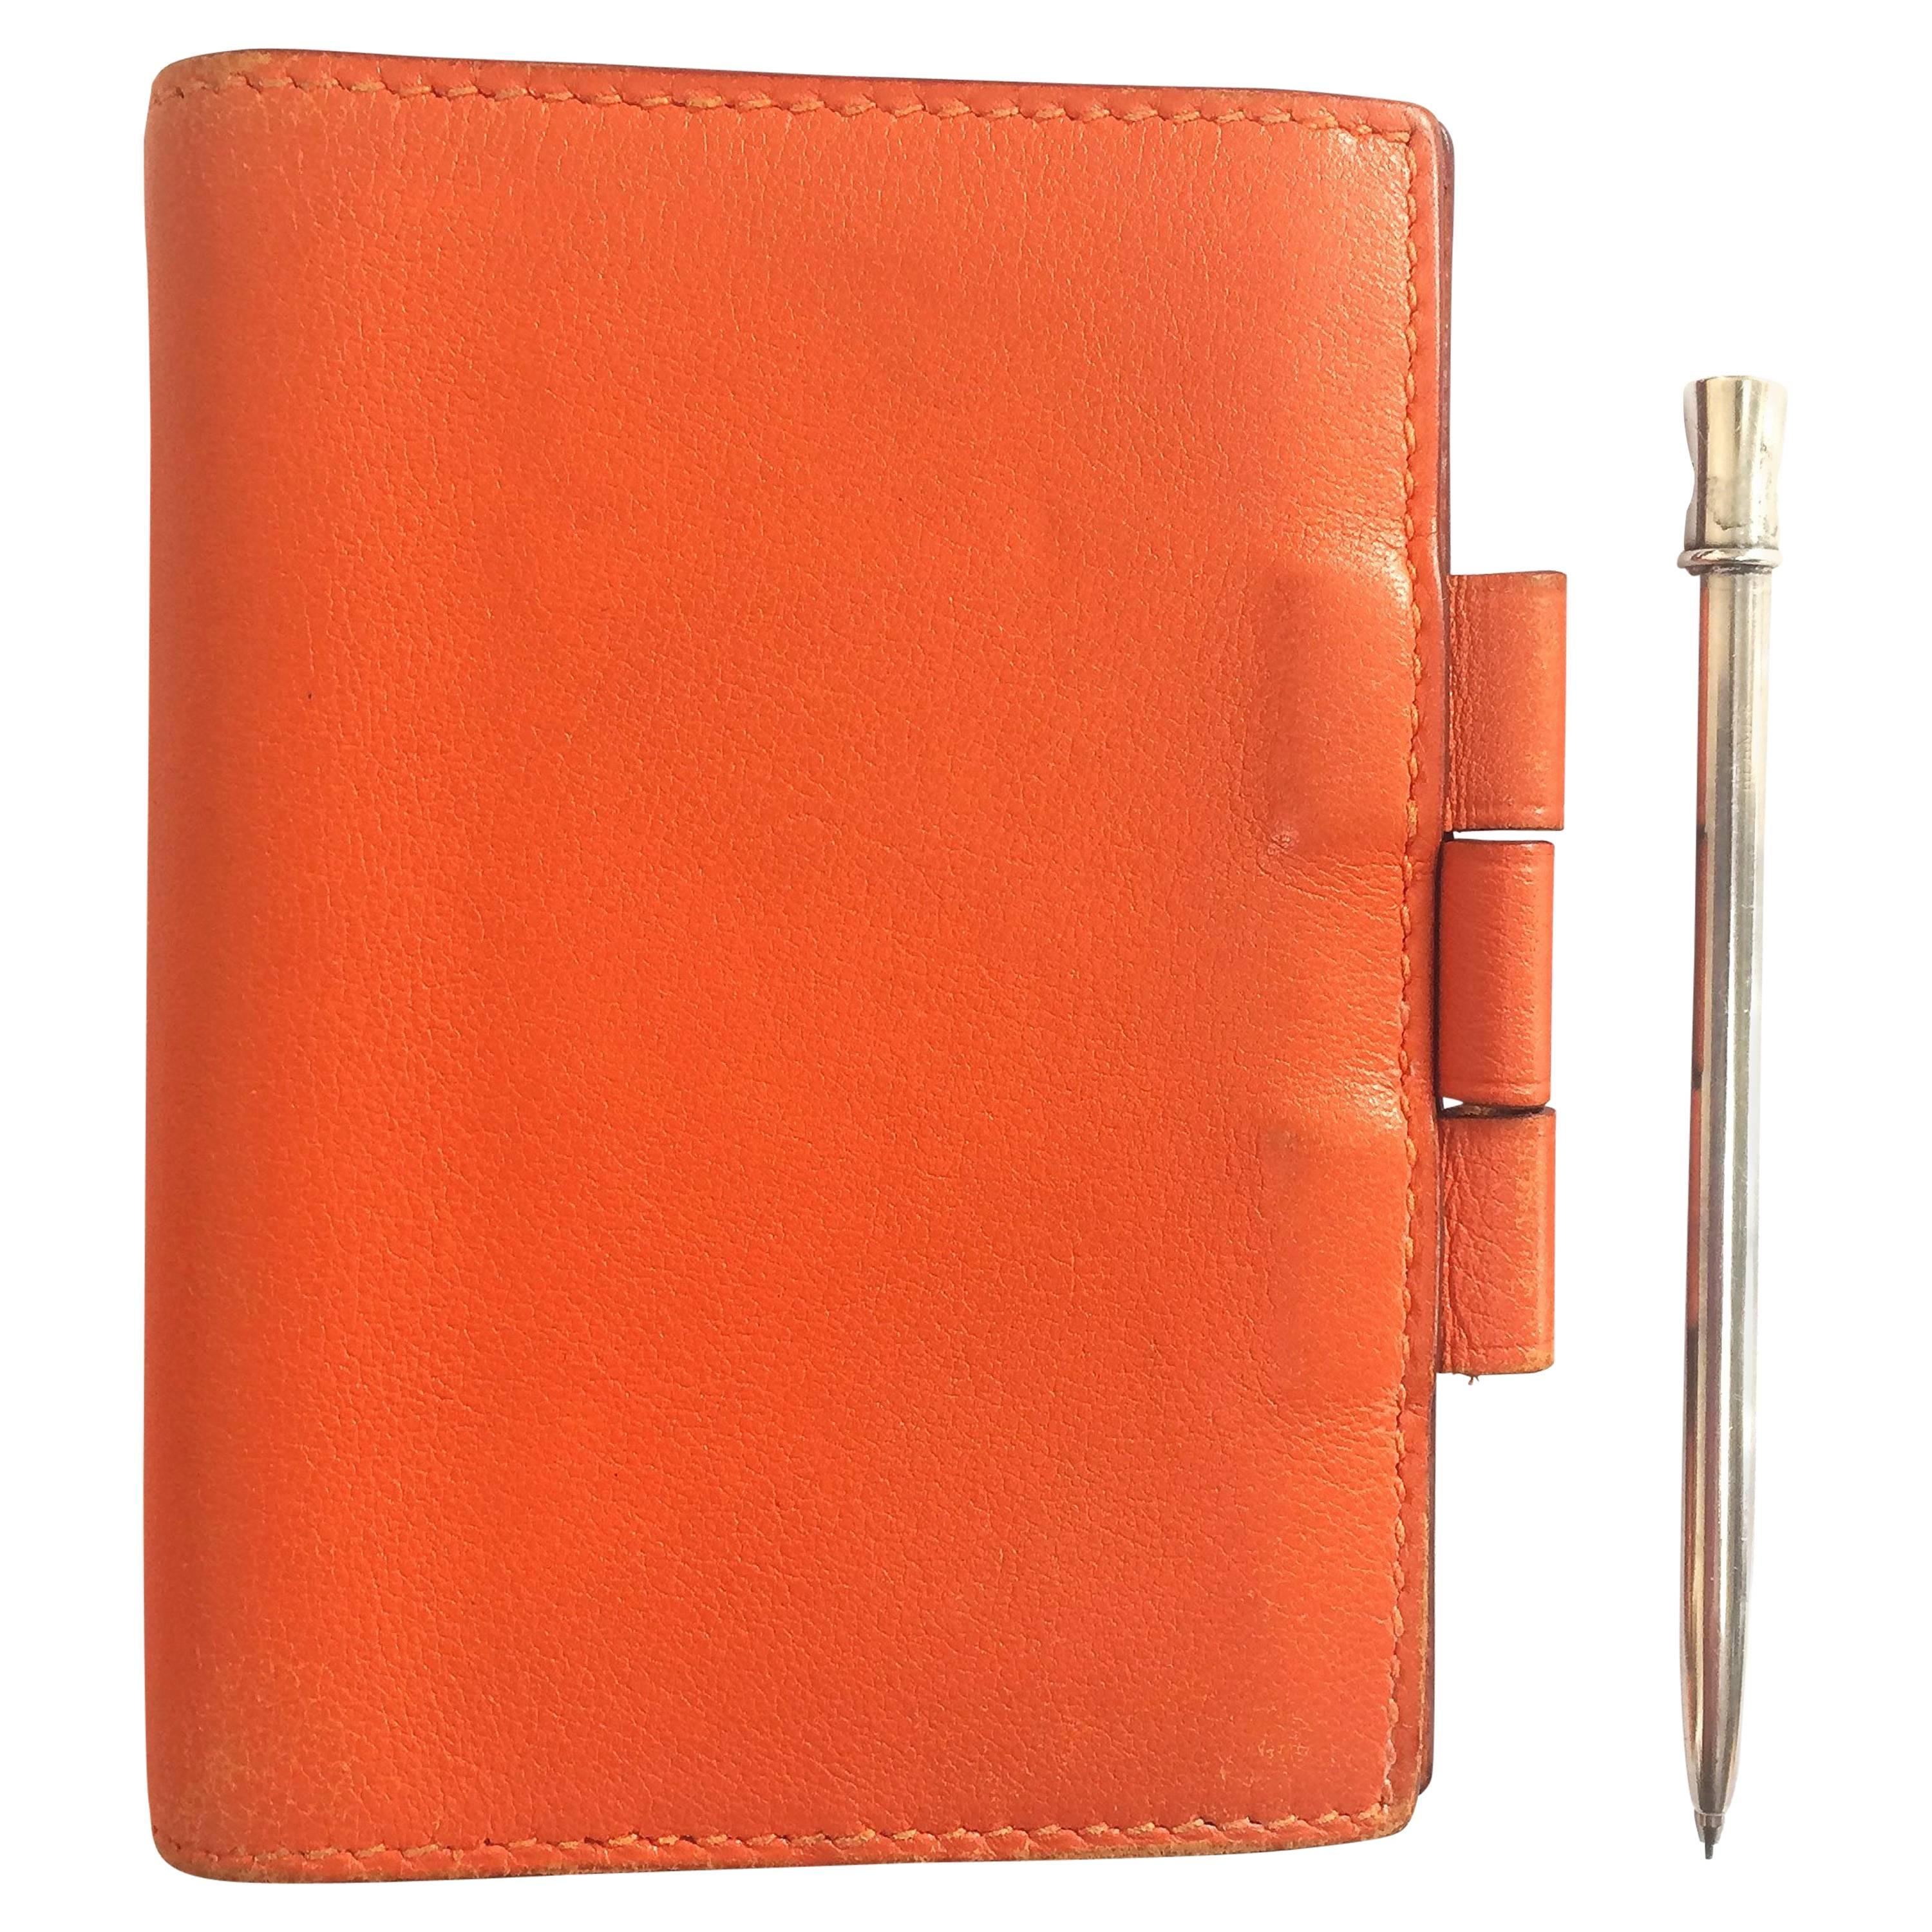 Vintage HERMES orange leather diary, schedule book cover PM with silver pencil For Sale